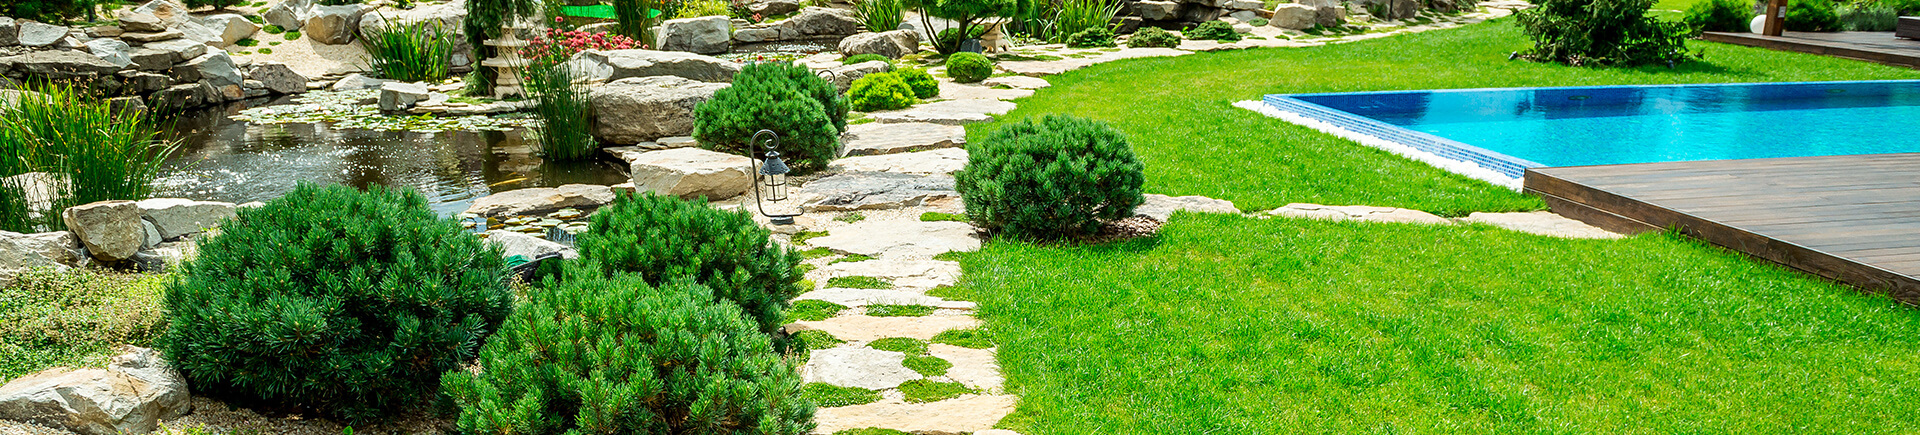 Keep Your Grass Greener with These Summer Lawn Care Tips Decatur, GA